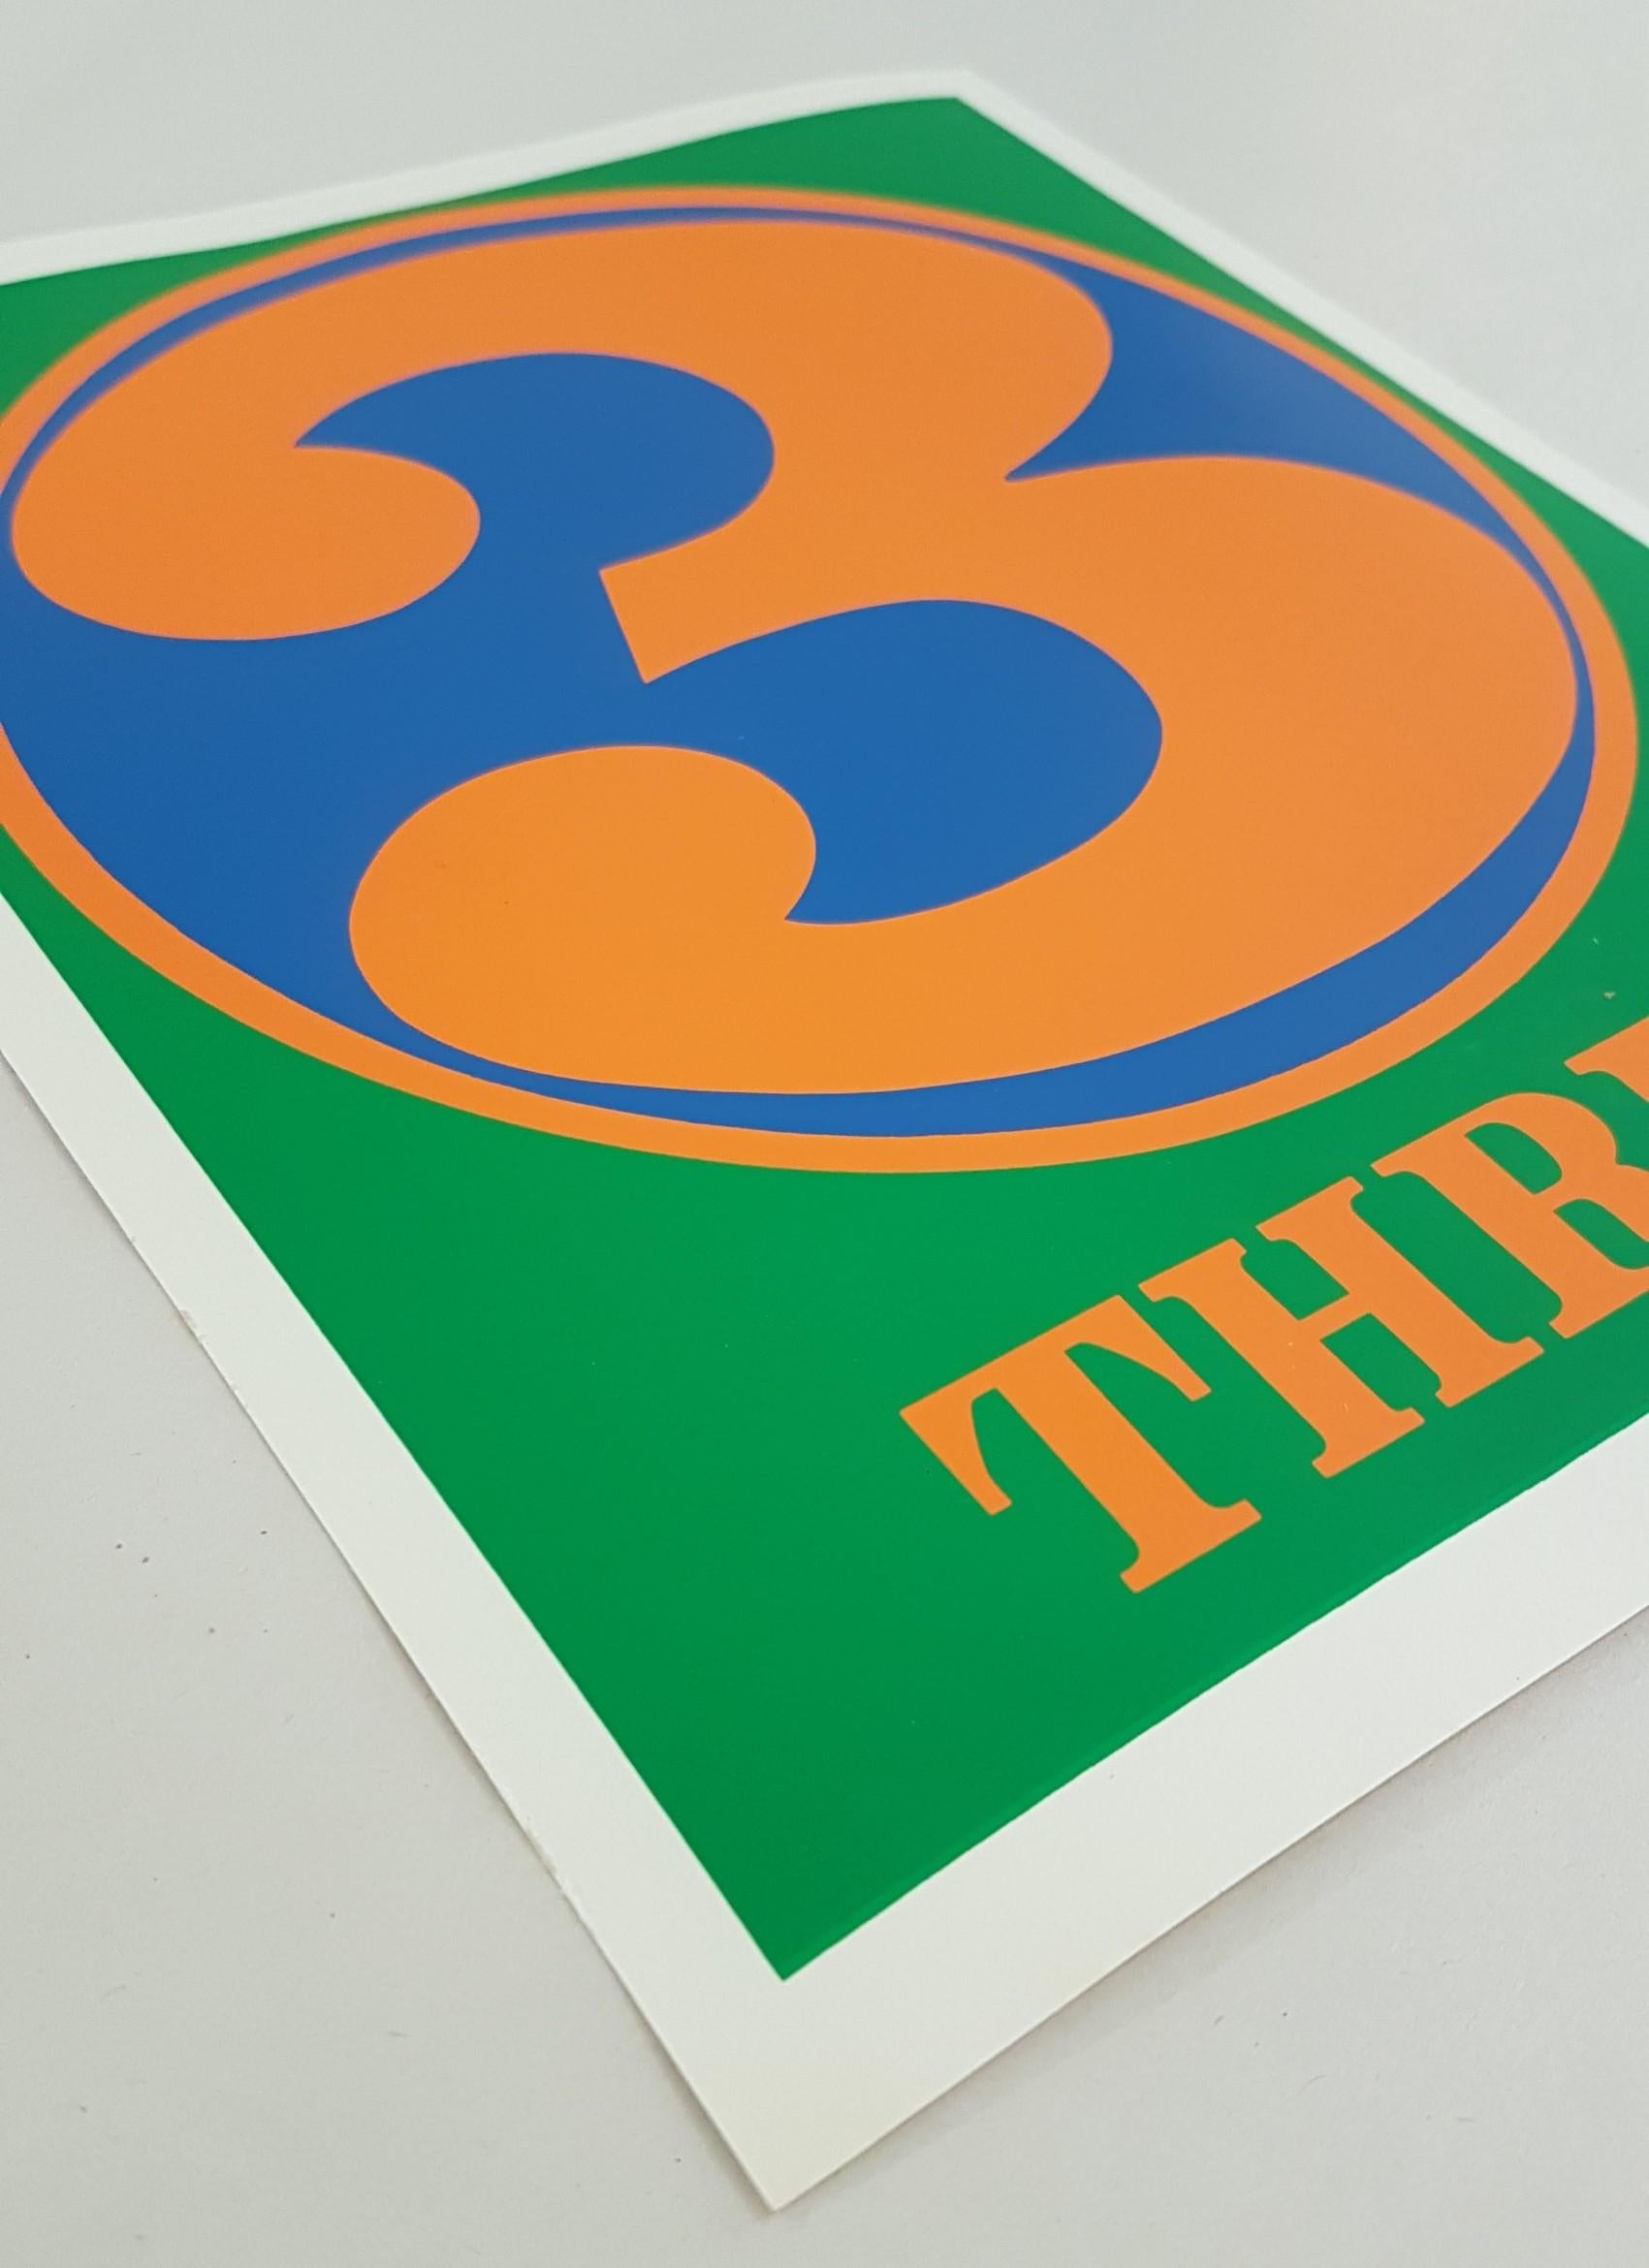 Number Suite - Three - Print by Robert Indiana